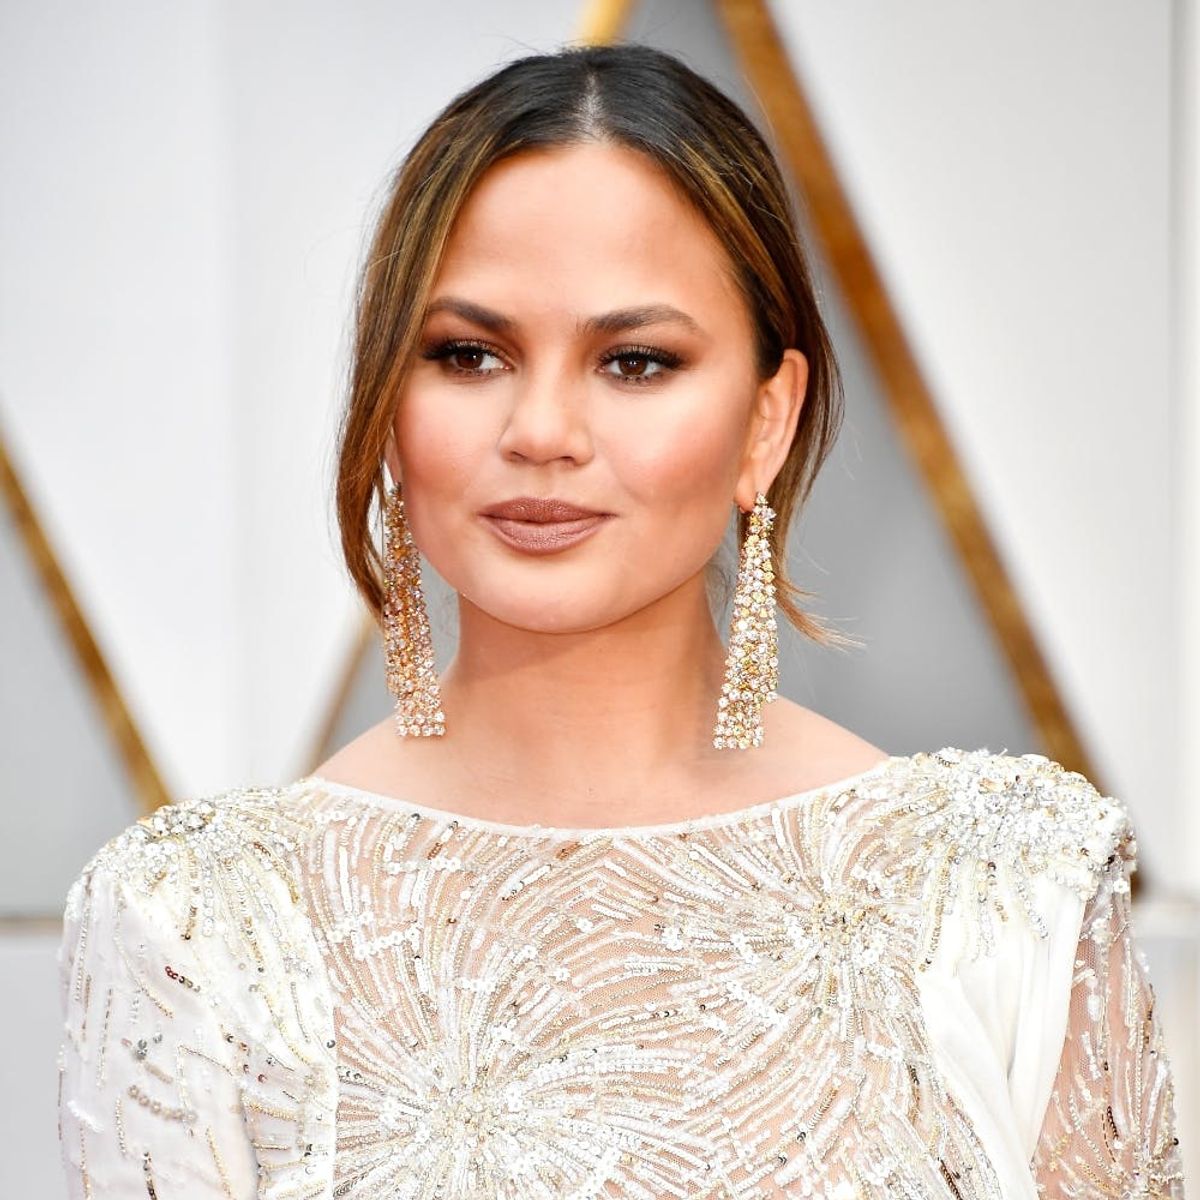 Chrissy Teigen Has Opened Up About Her Battle With Postpartum Depression